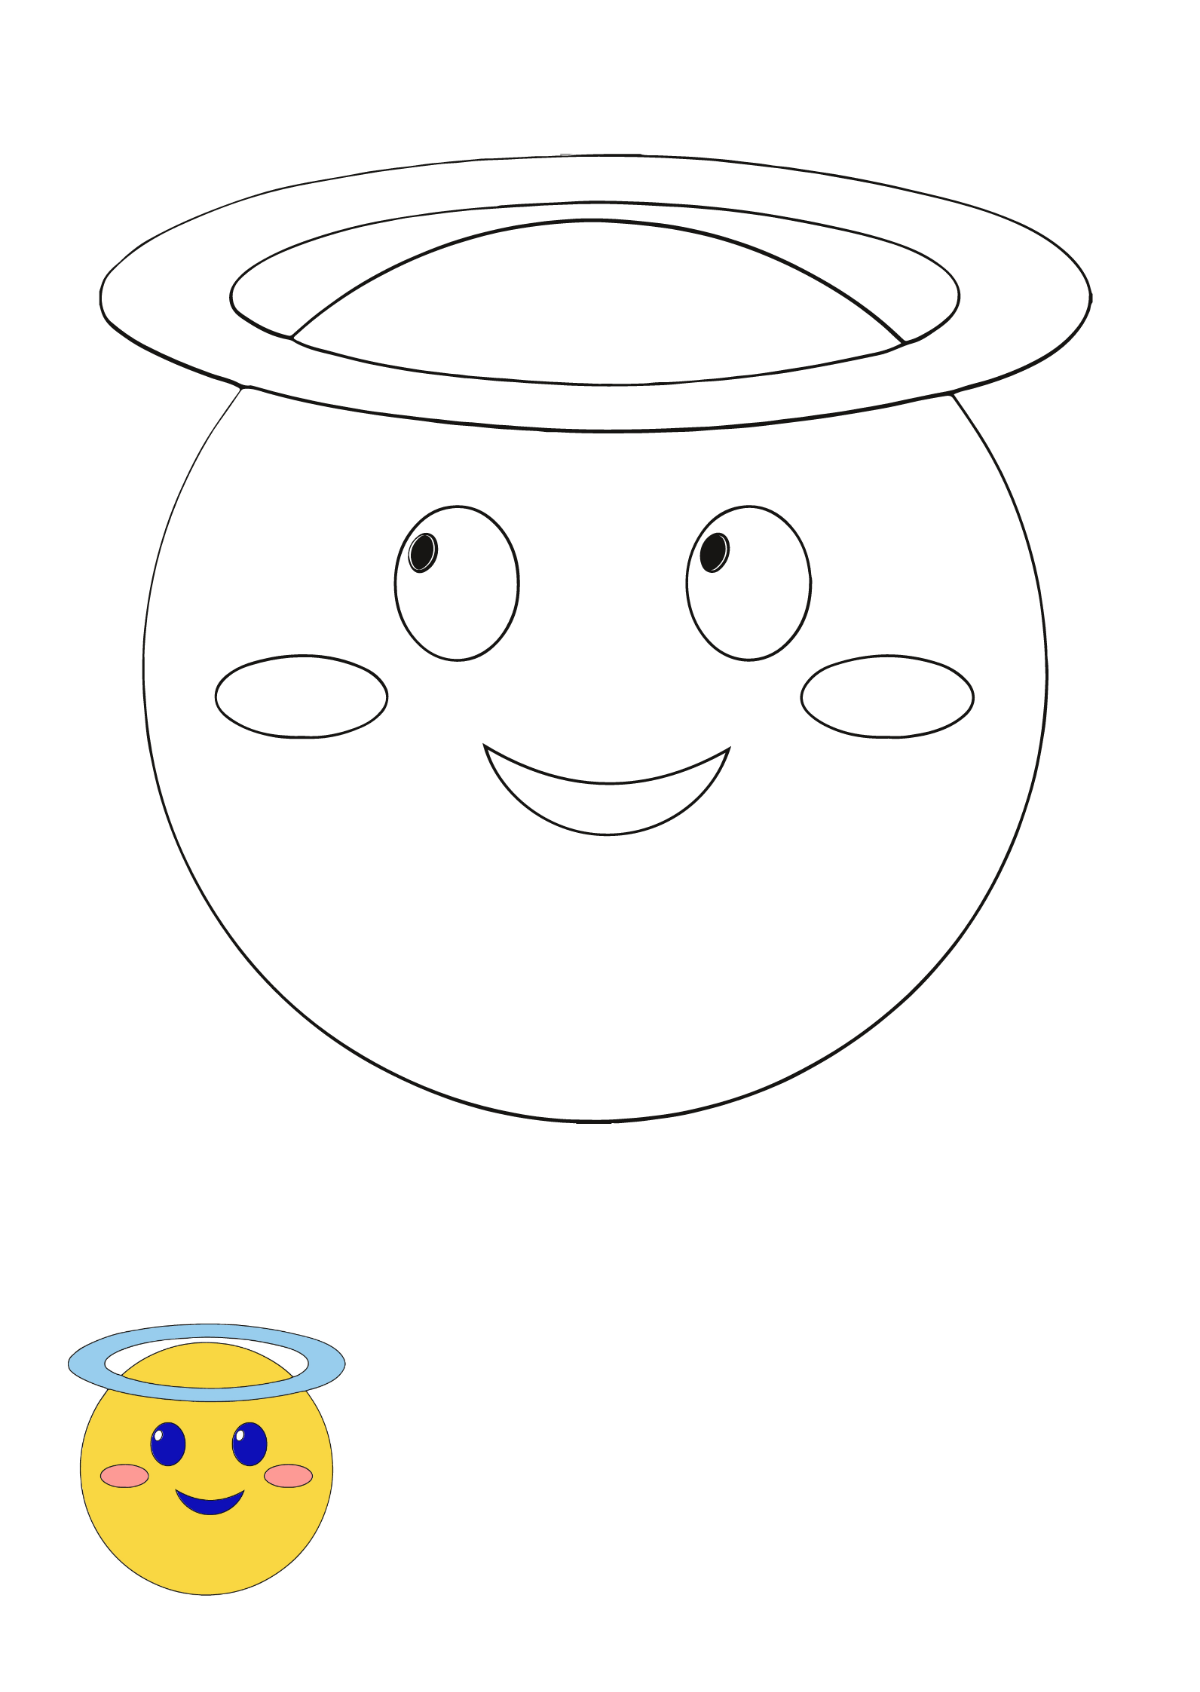 Angel Smiley Coloring Page Template